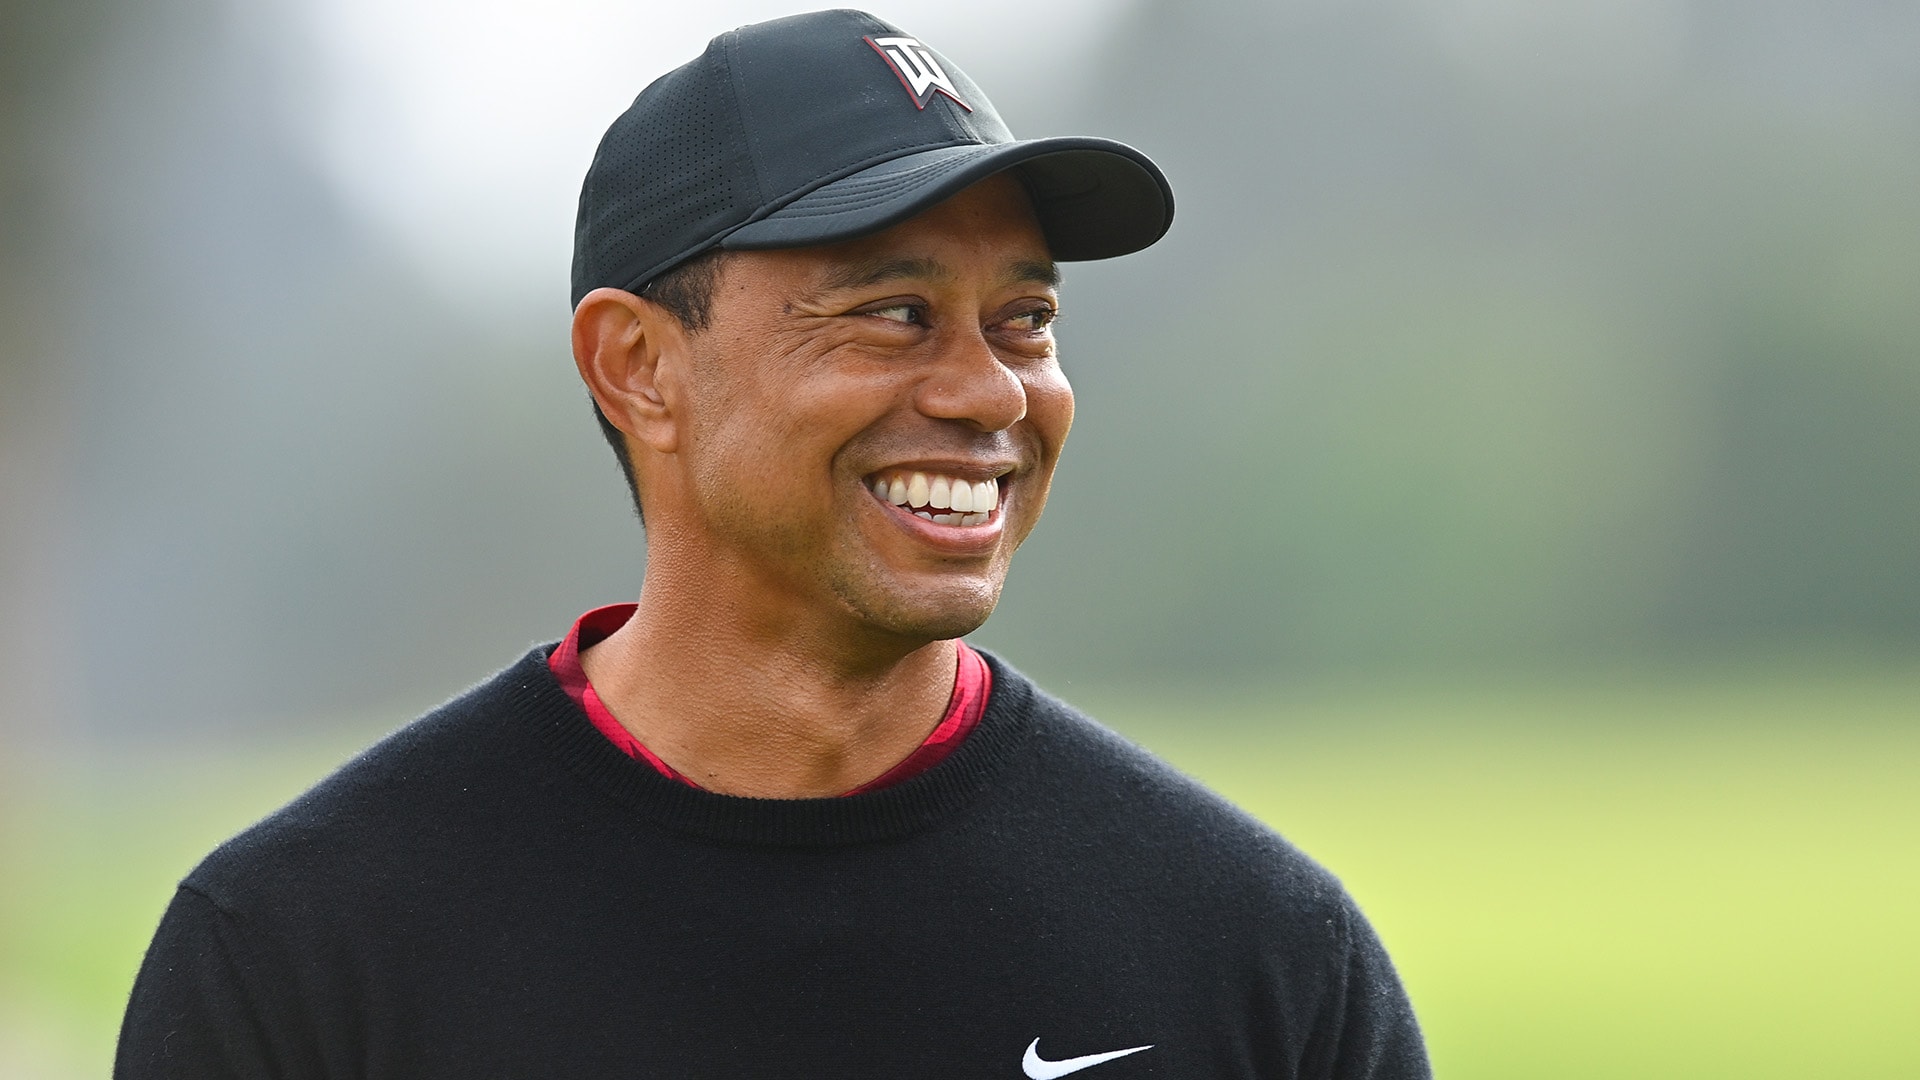 Reports say Tiger Woods on site Tuesday at Augusta National